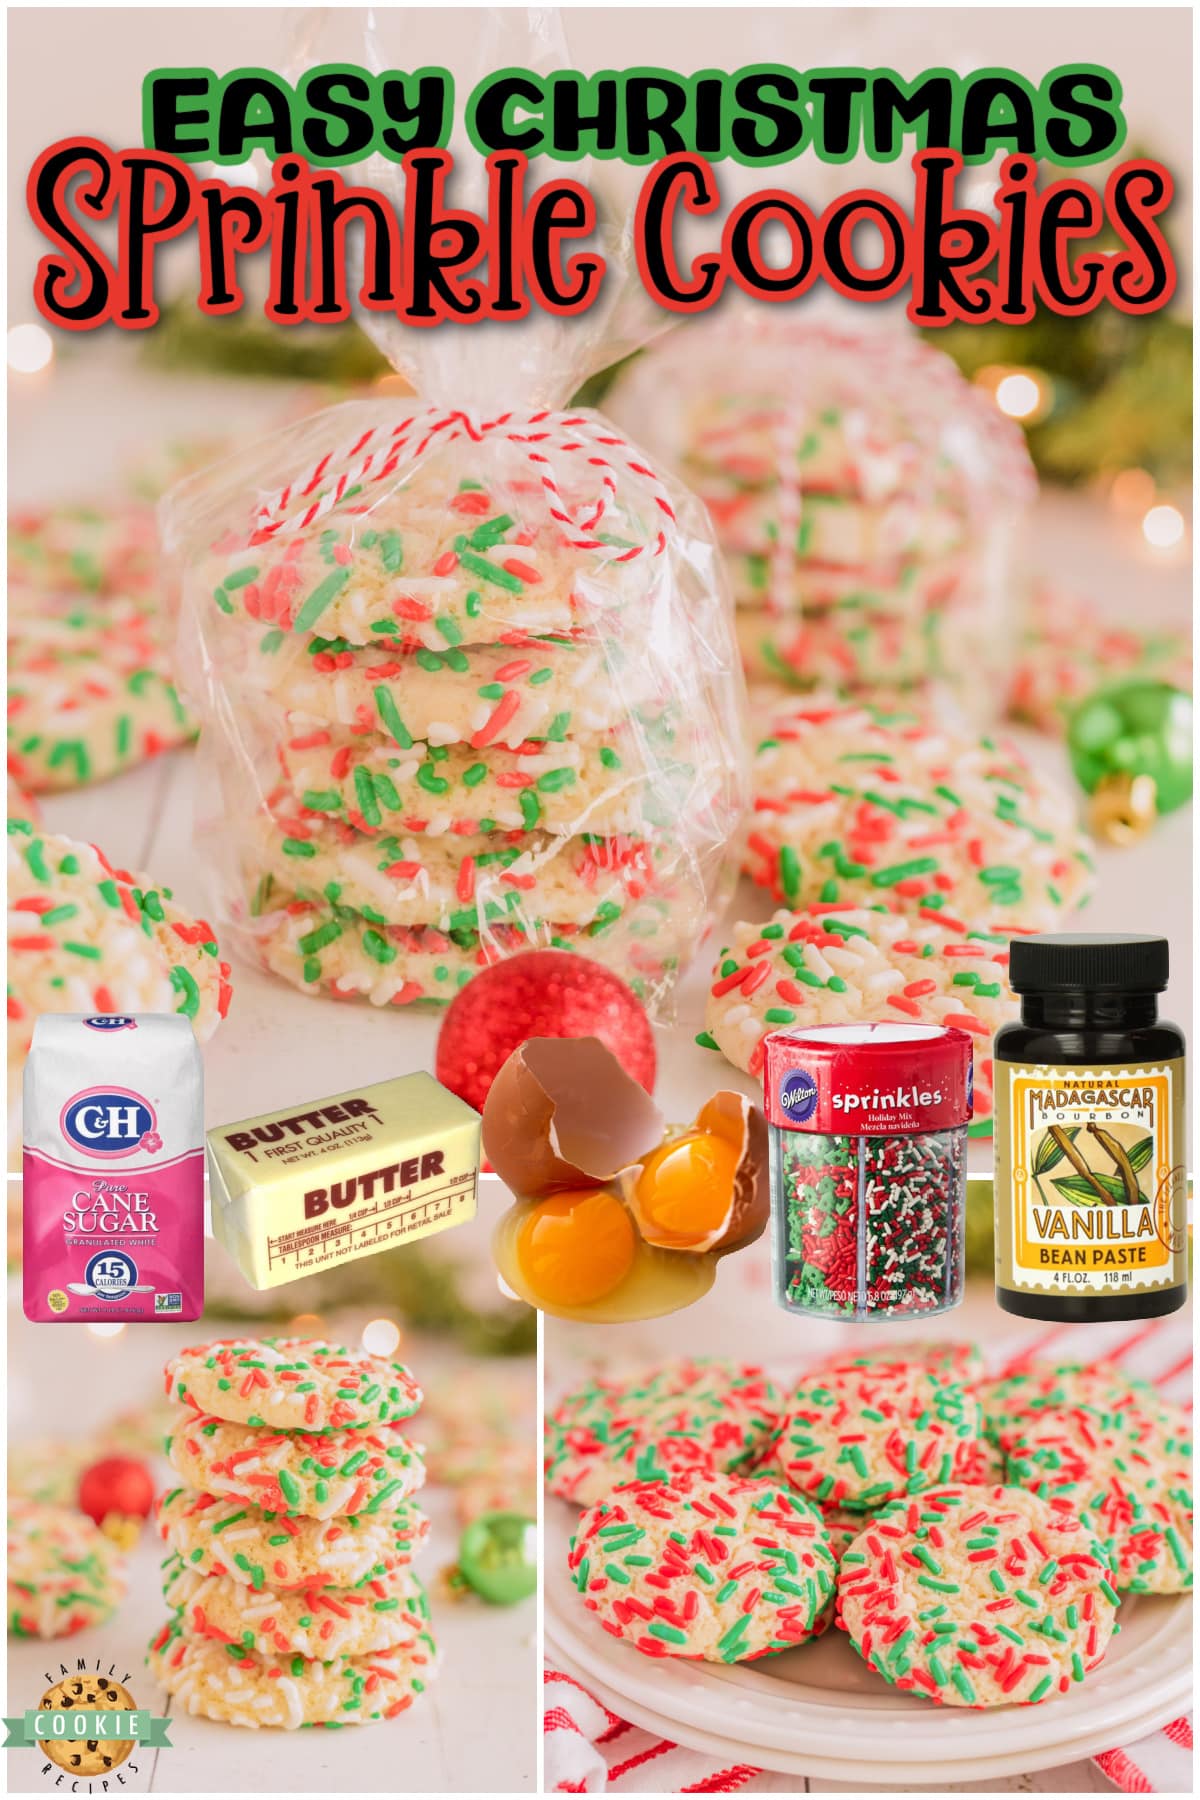 Christmas Sprinkle Cookies are a soft and chewy vanilla sugar cookie covered with red and green sprinkles. Just like the sprinkle cookies made at a bakery, these Christmas Cookies are deliciously festive!